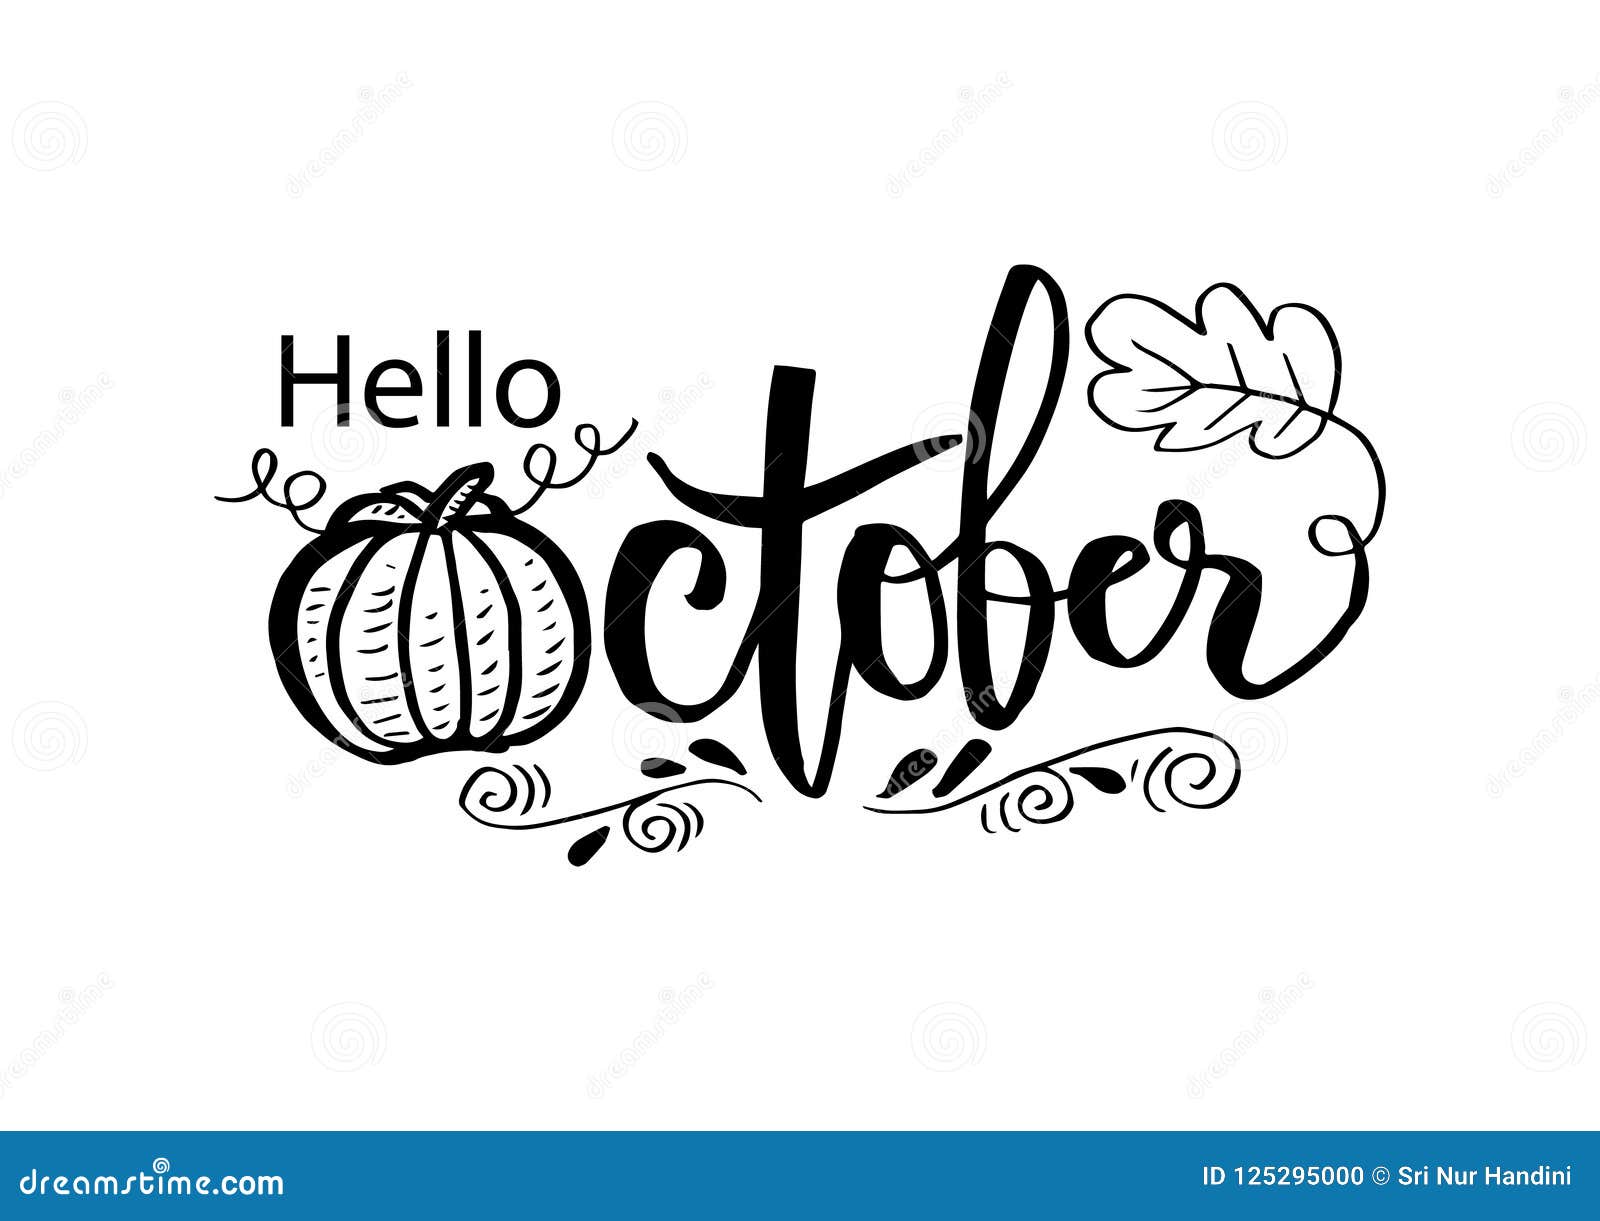 hello october greeting card.